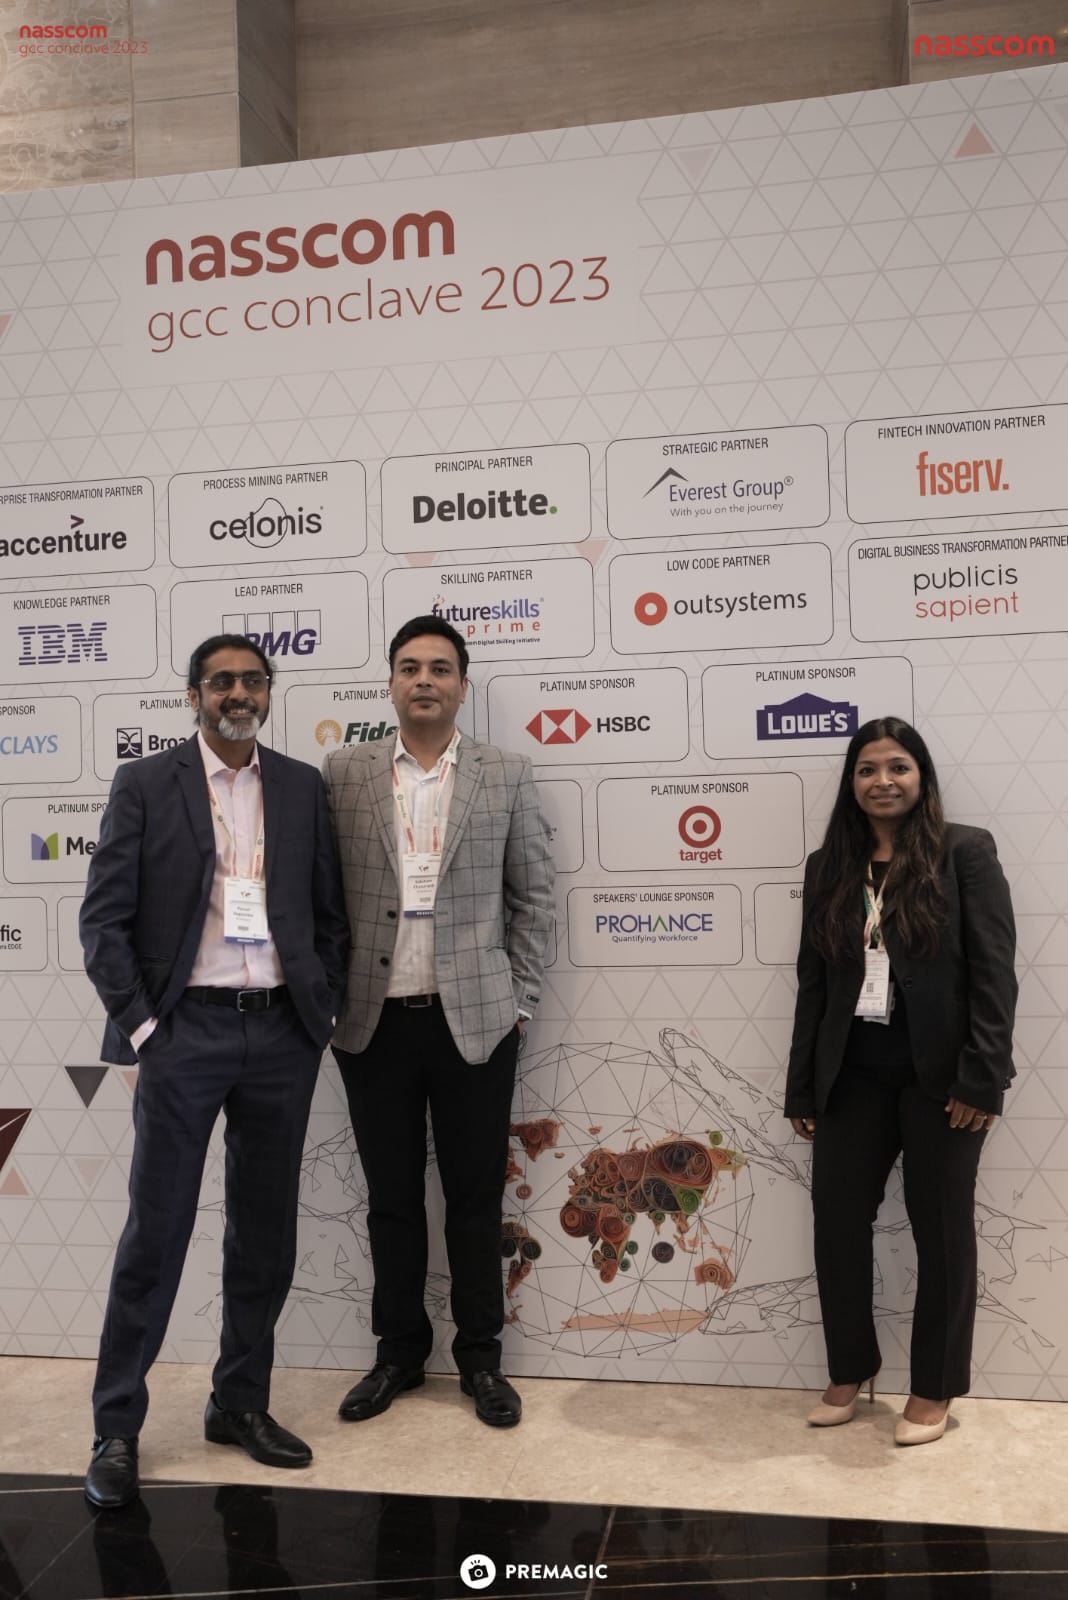 The ProHance team at the Nasscom GCC Conclave